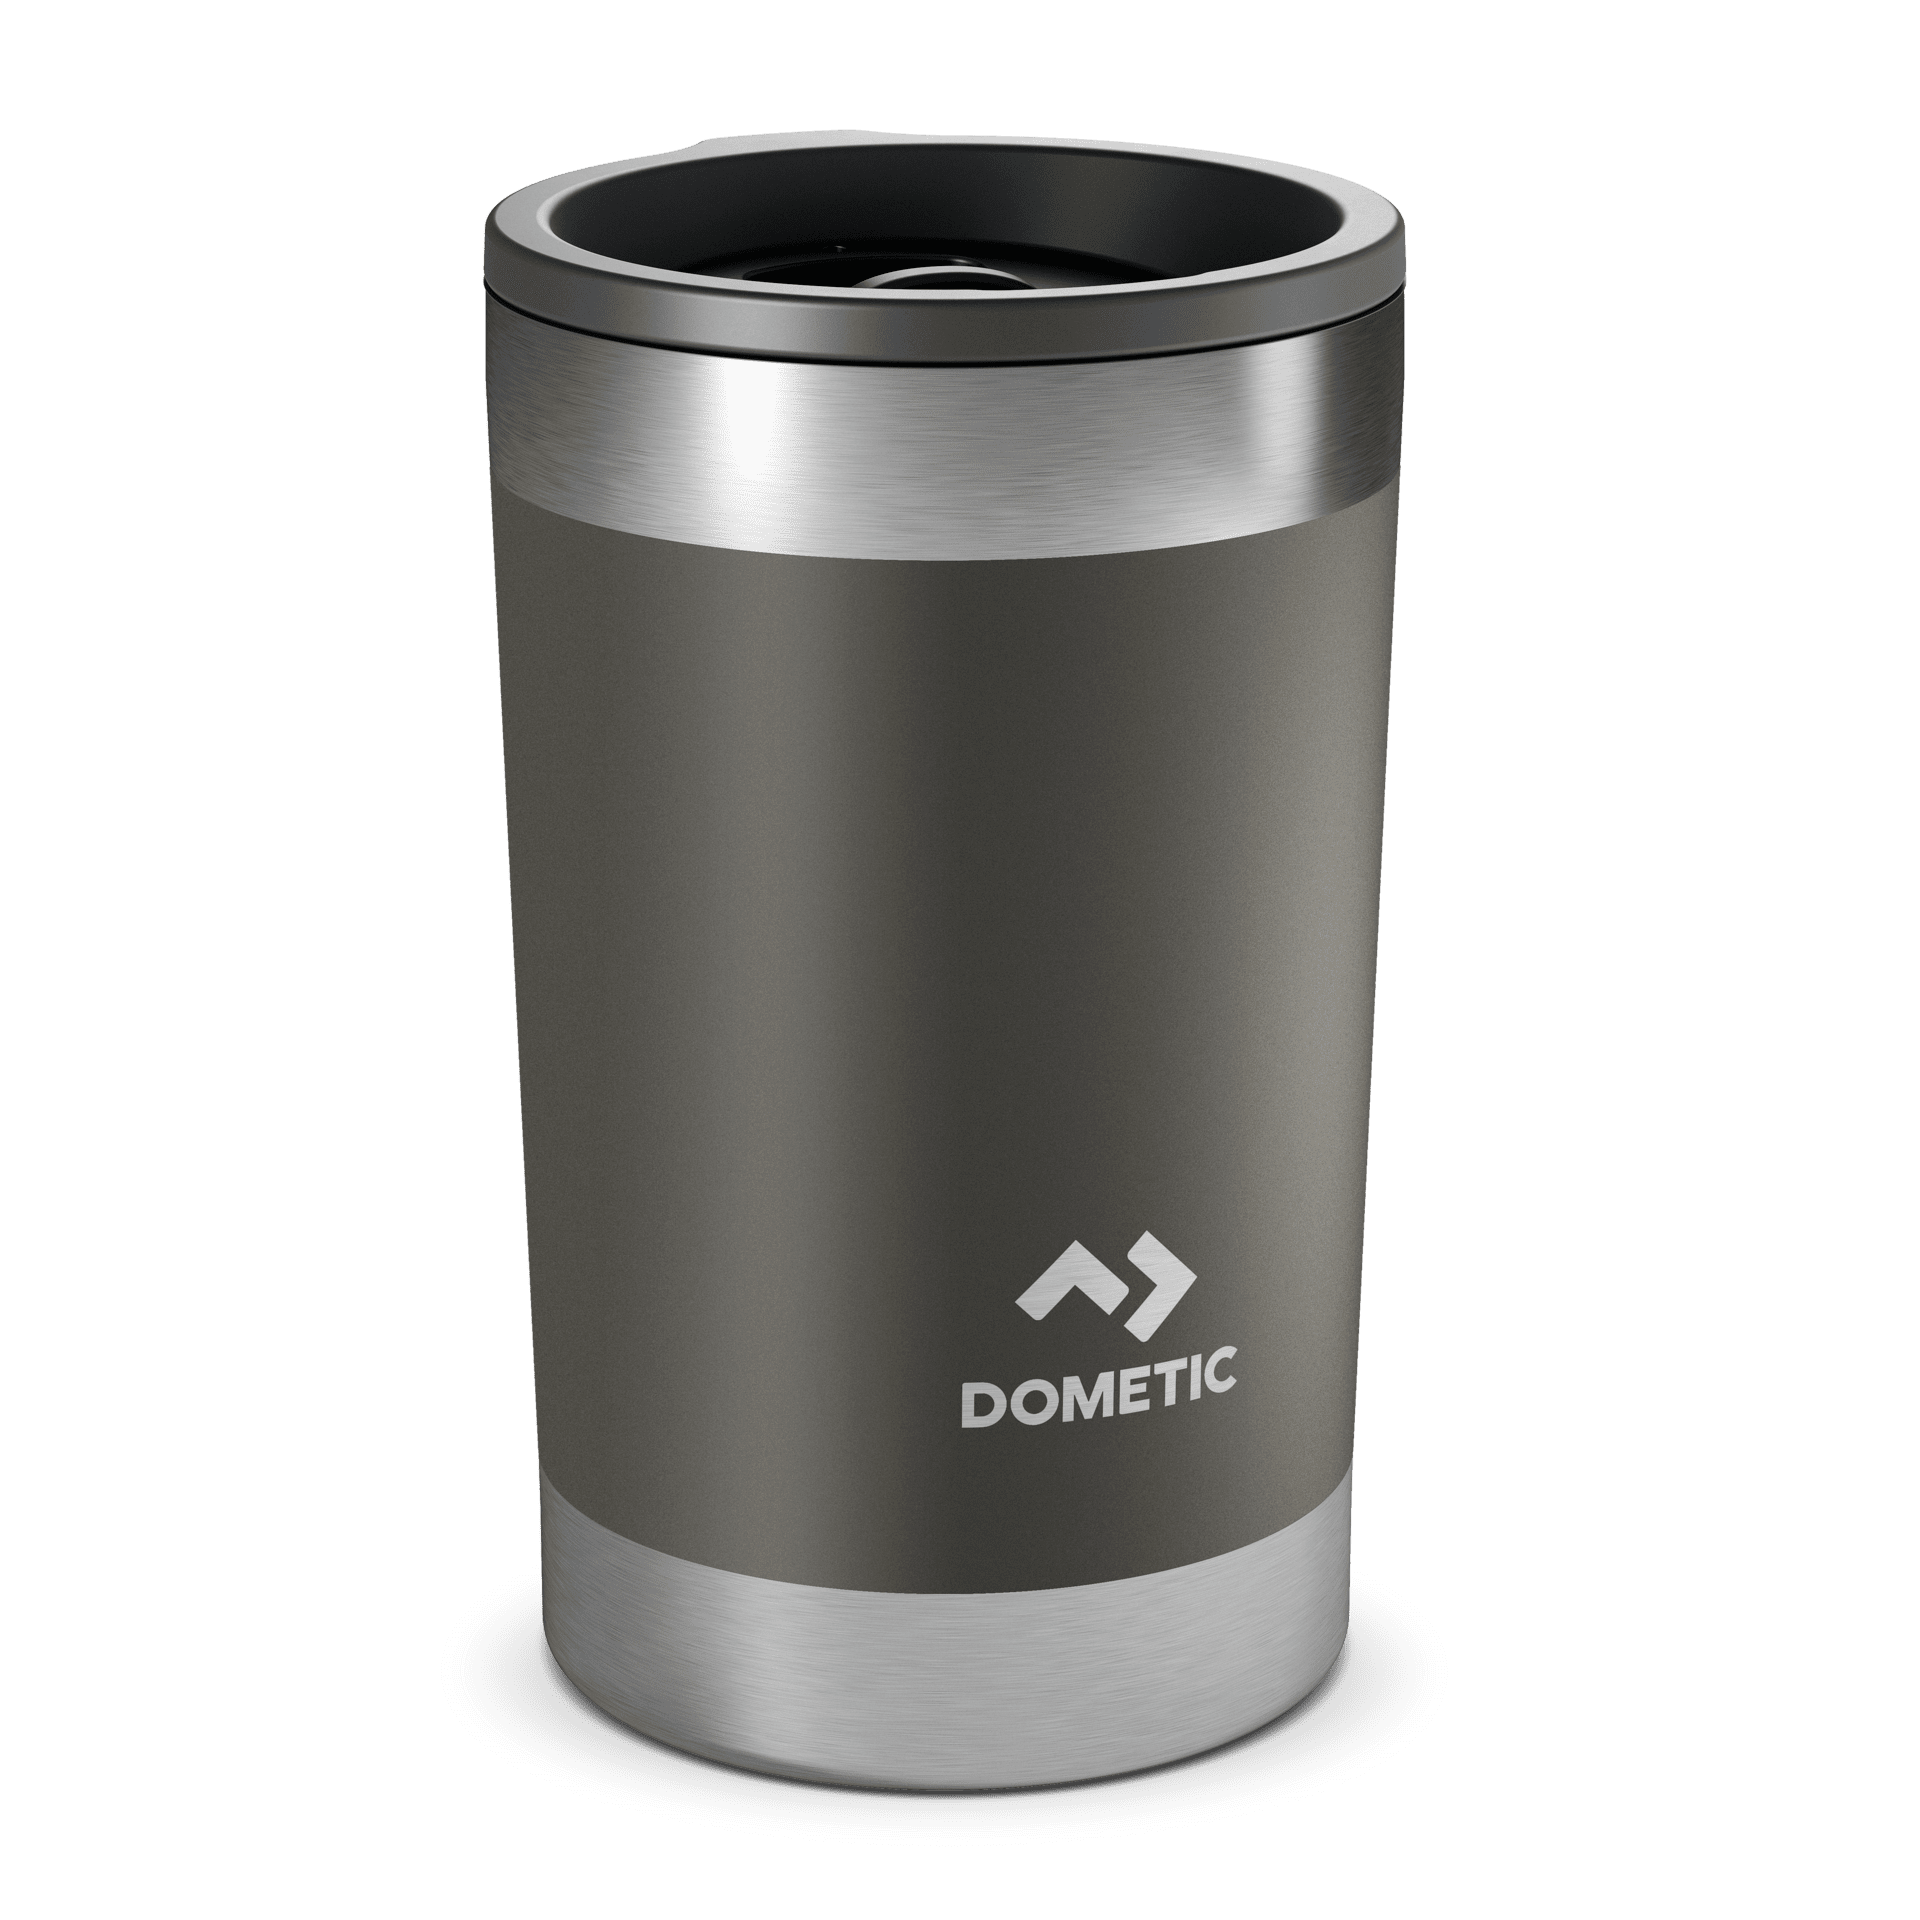 https://www.sierraparts.com/externalassets/dometic-thermo-tumbler-32_9600029346_94832.png?ref=-421727816